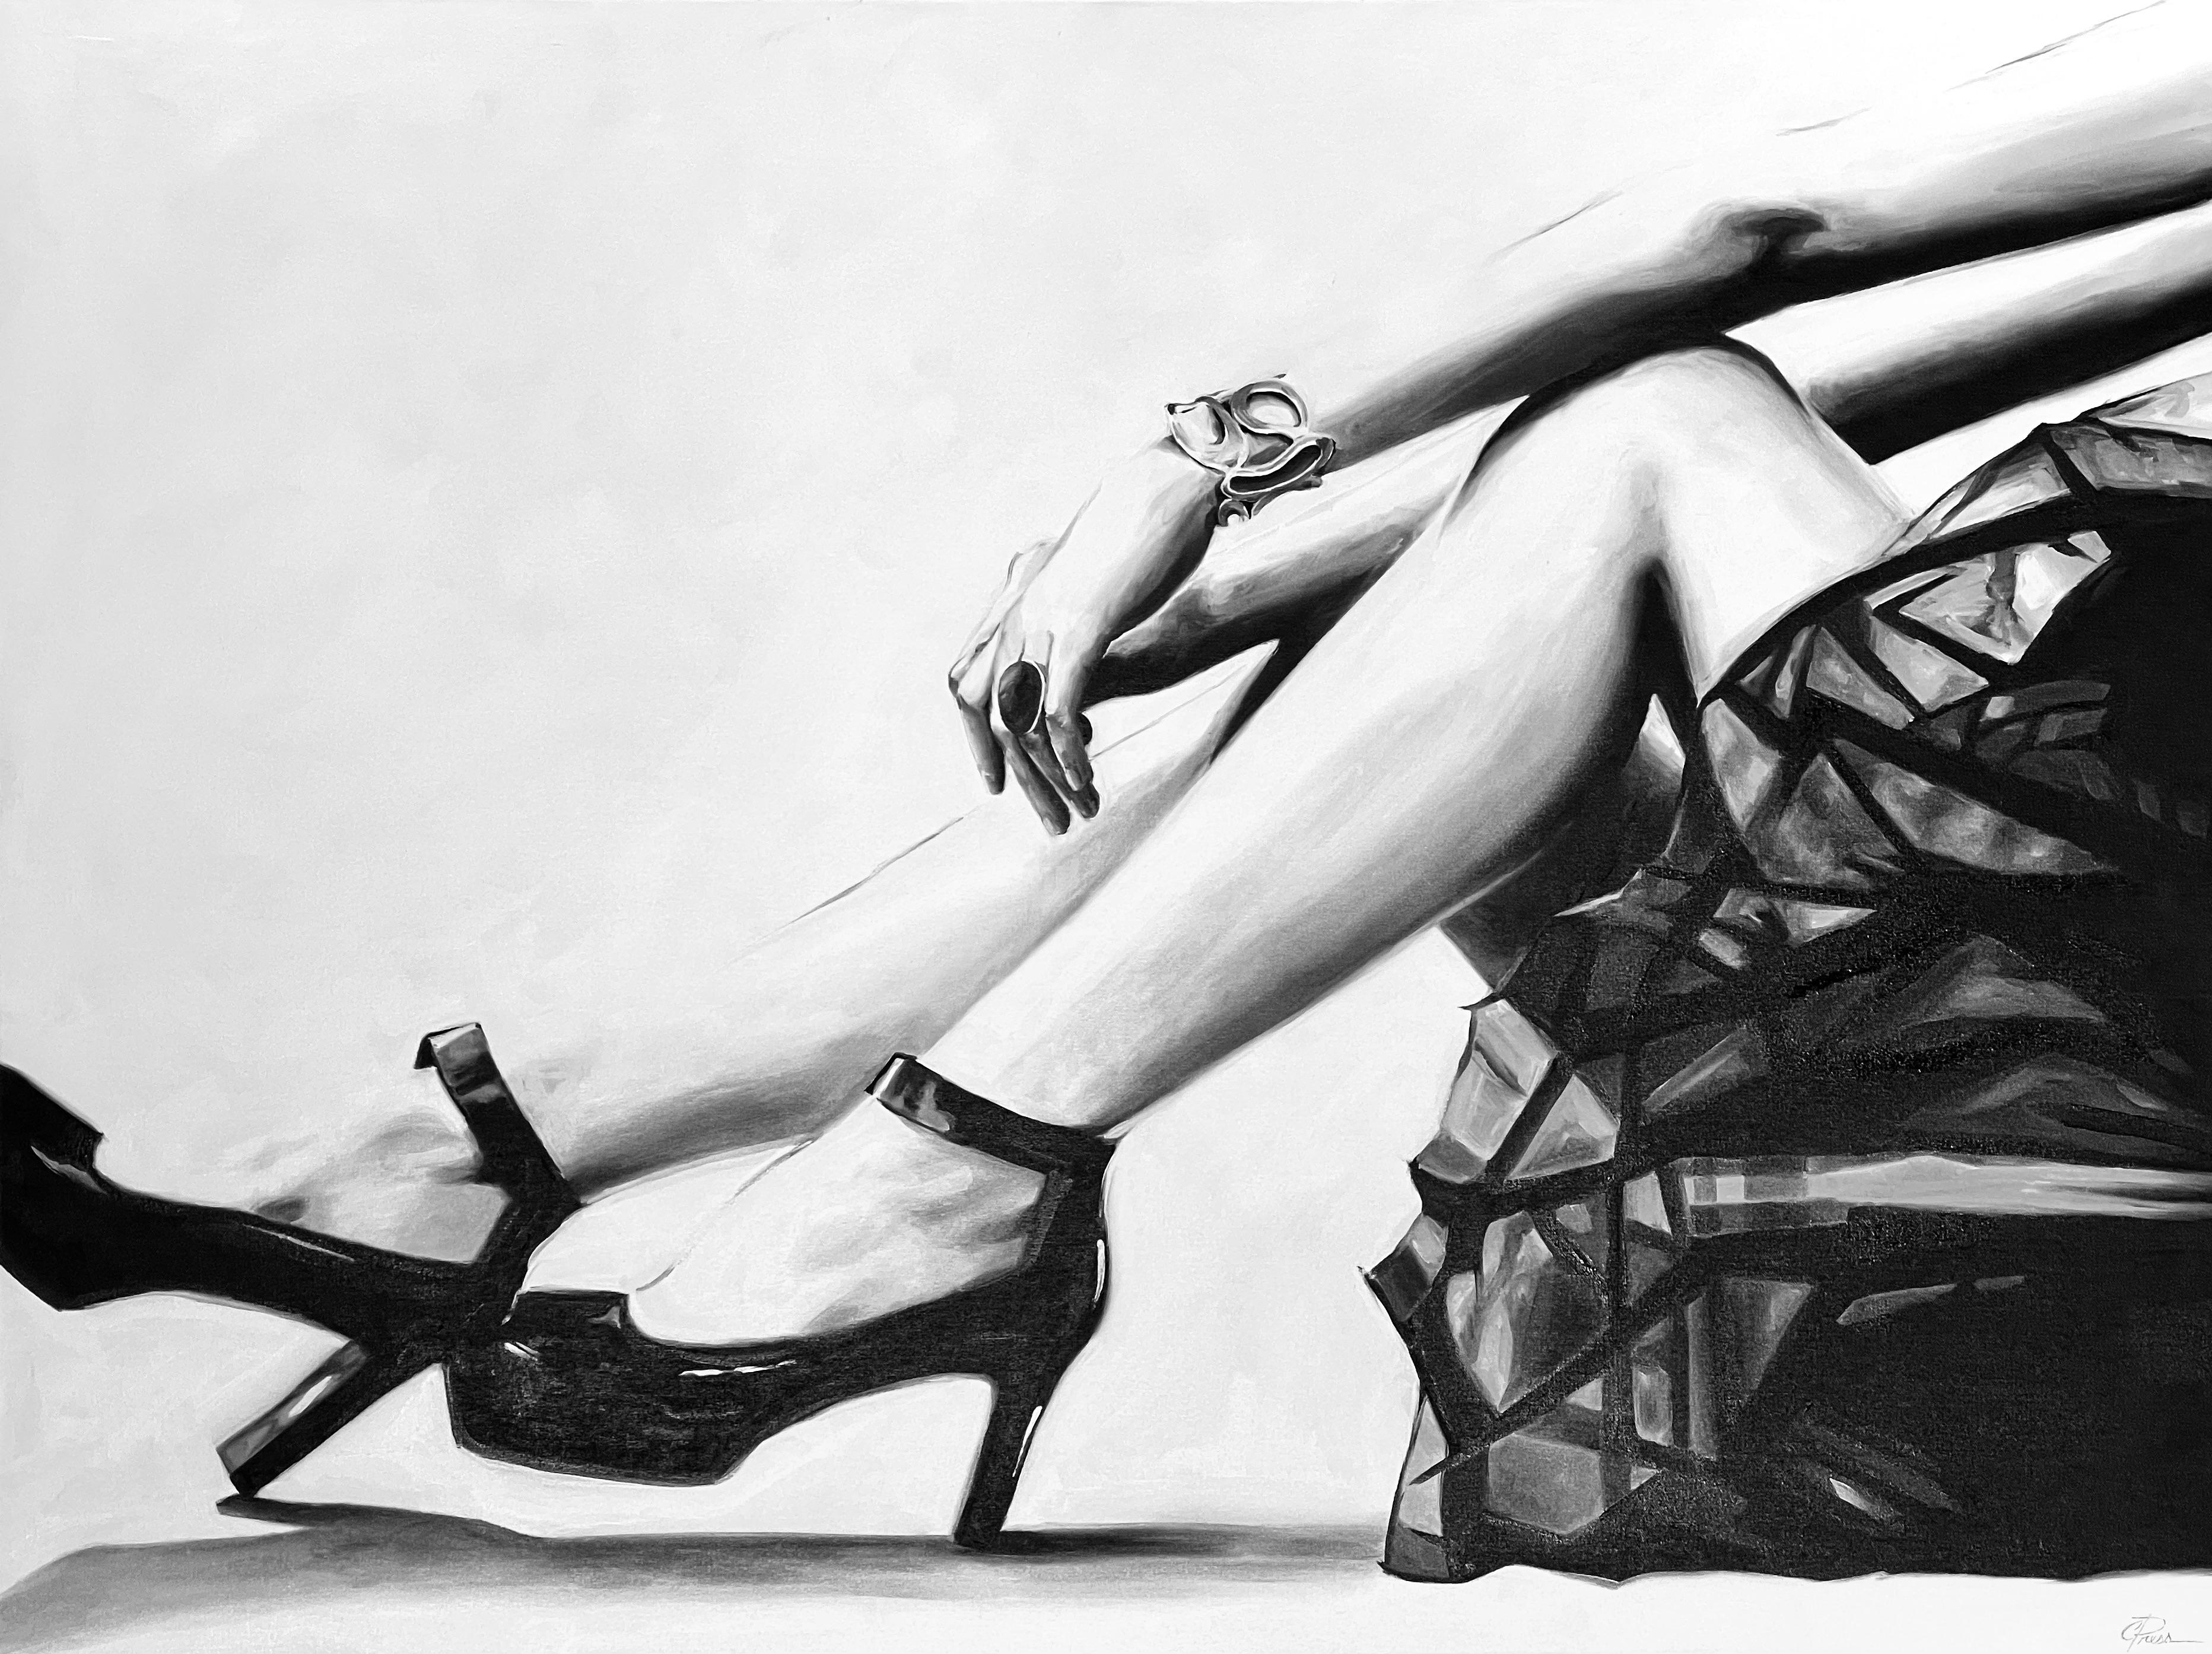 Cindy Press Figurative Painting - "It's Her Party" black and white oil painting of a woman's legs in tulle skirt